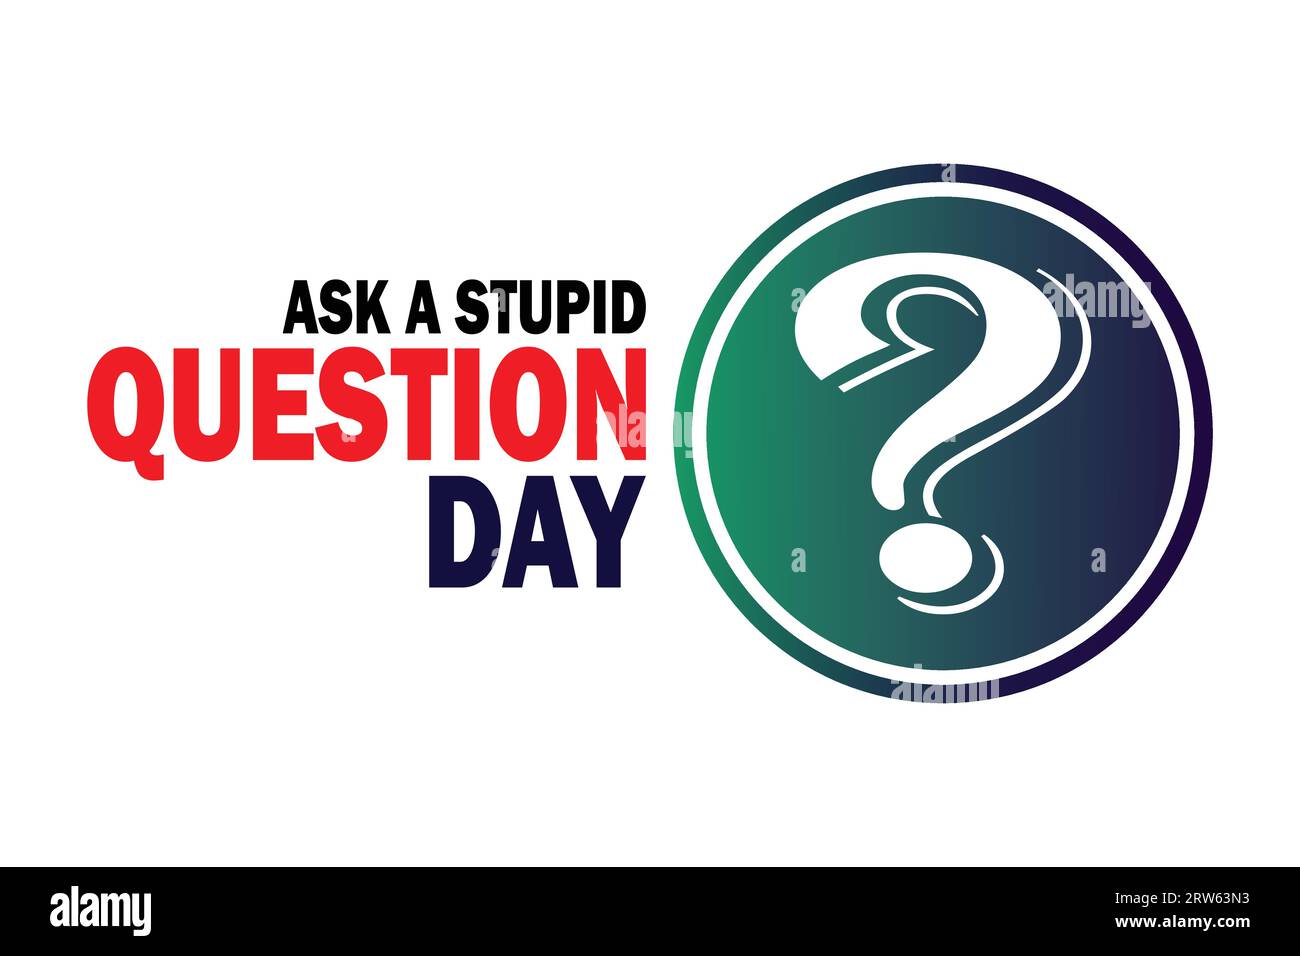 Ask A Stupid Question Day. Vector illustration. Suitable for greeting card, poster and banner. Stock Vector